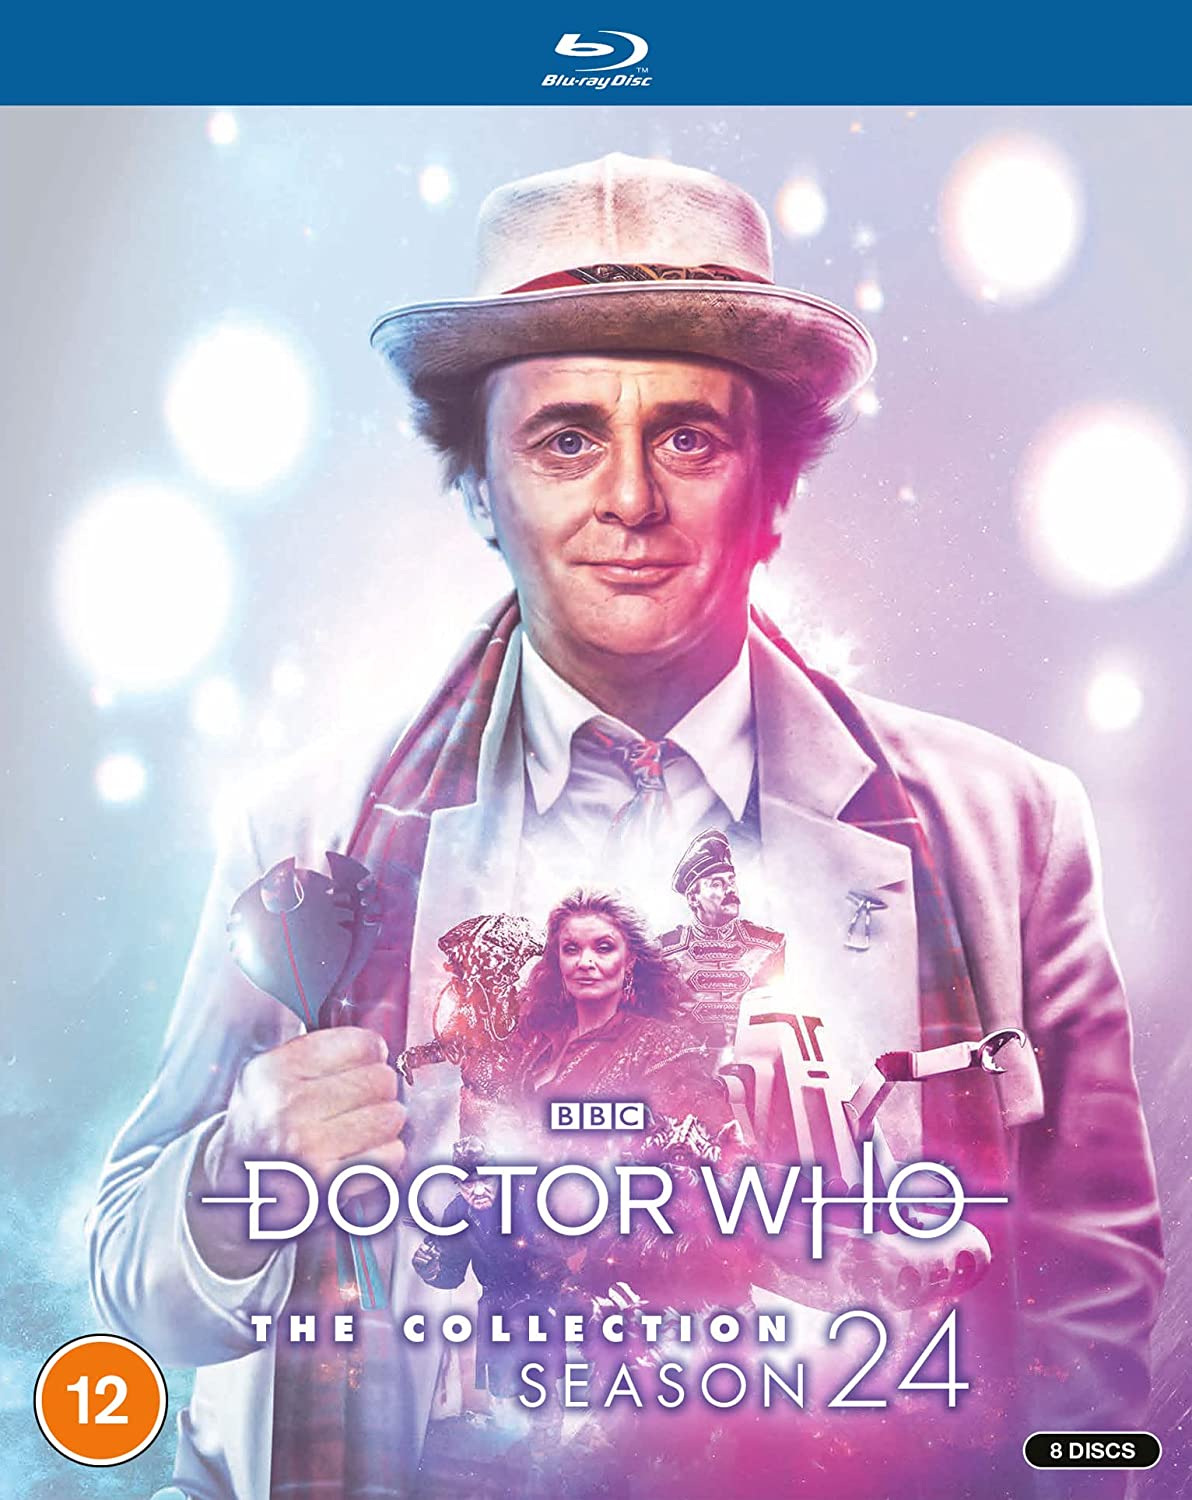 Doctor Who The Collection Season 24 Standard